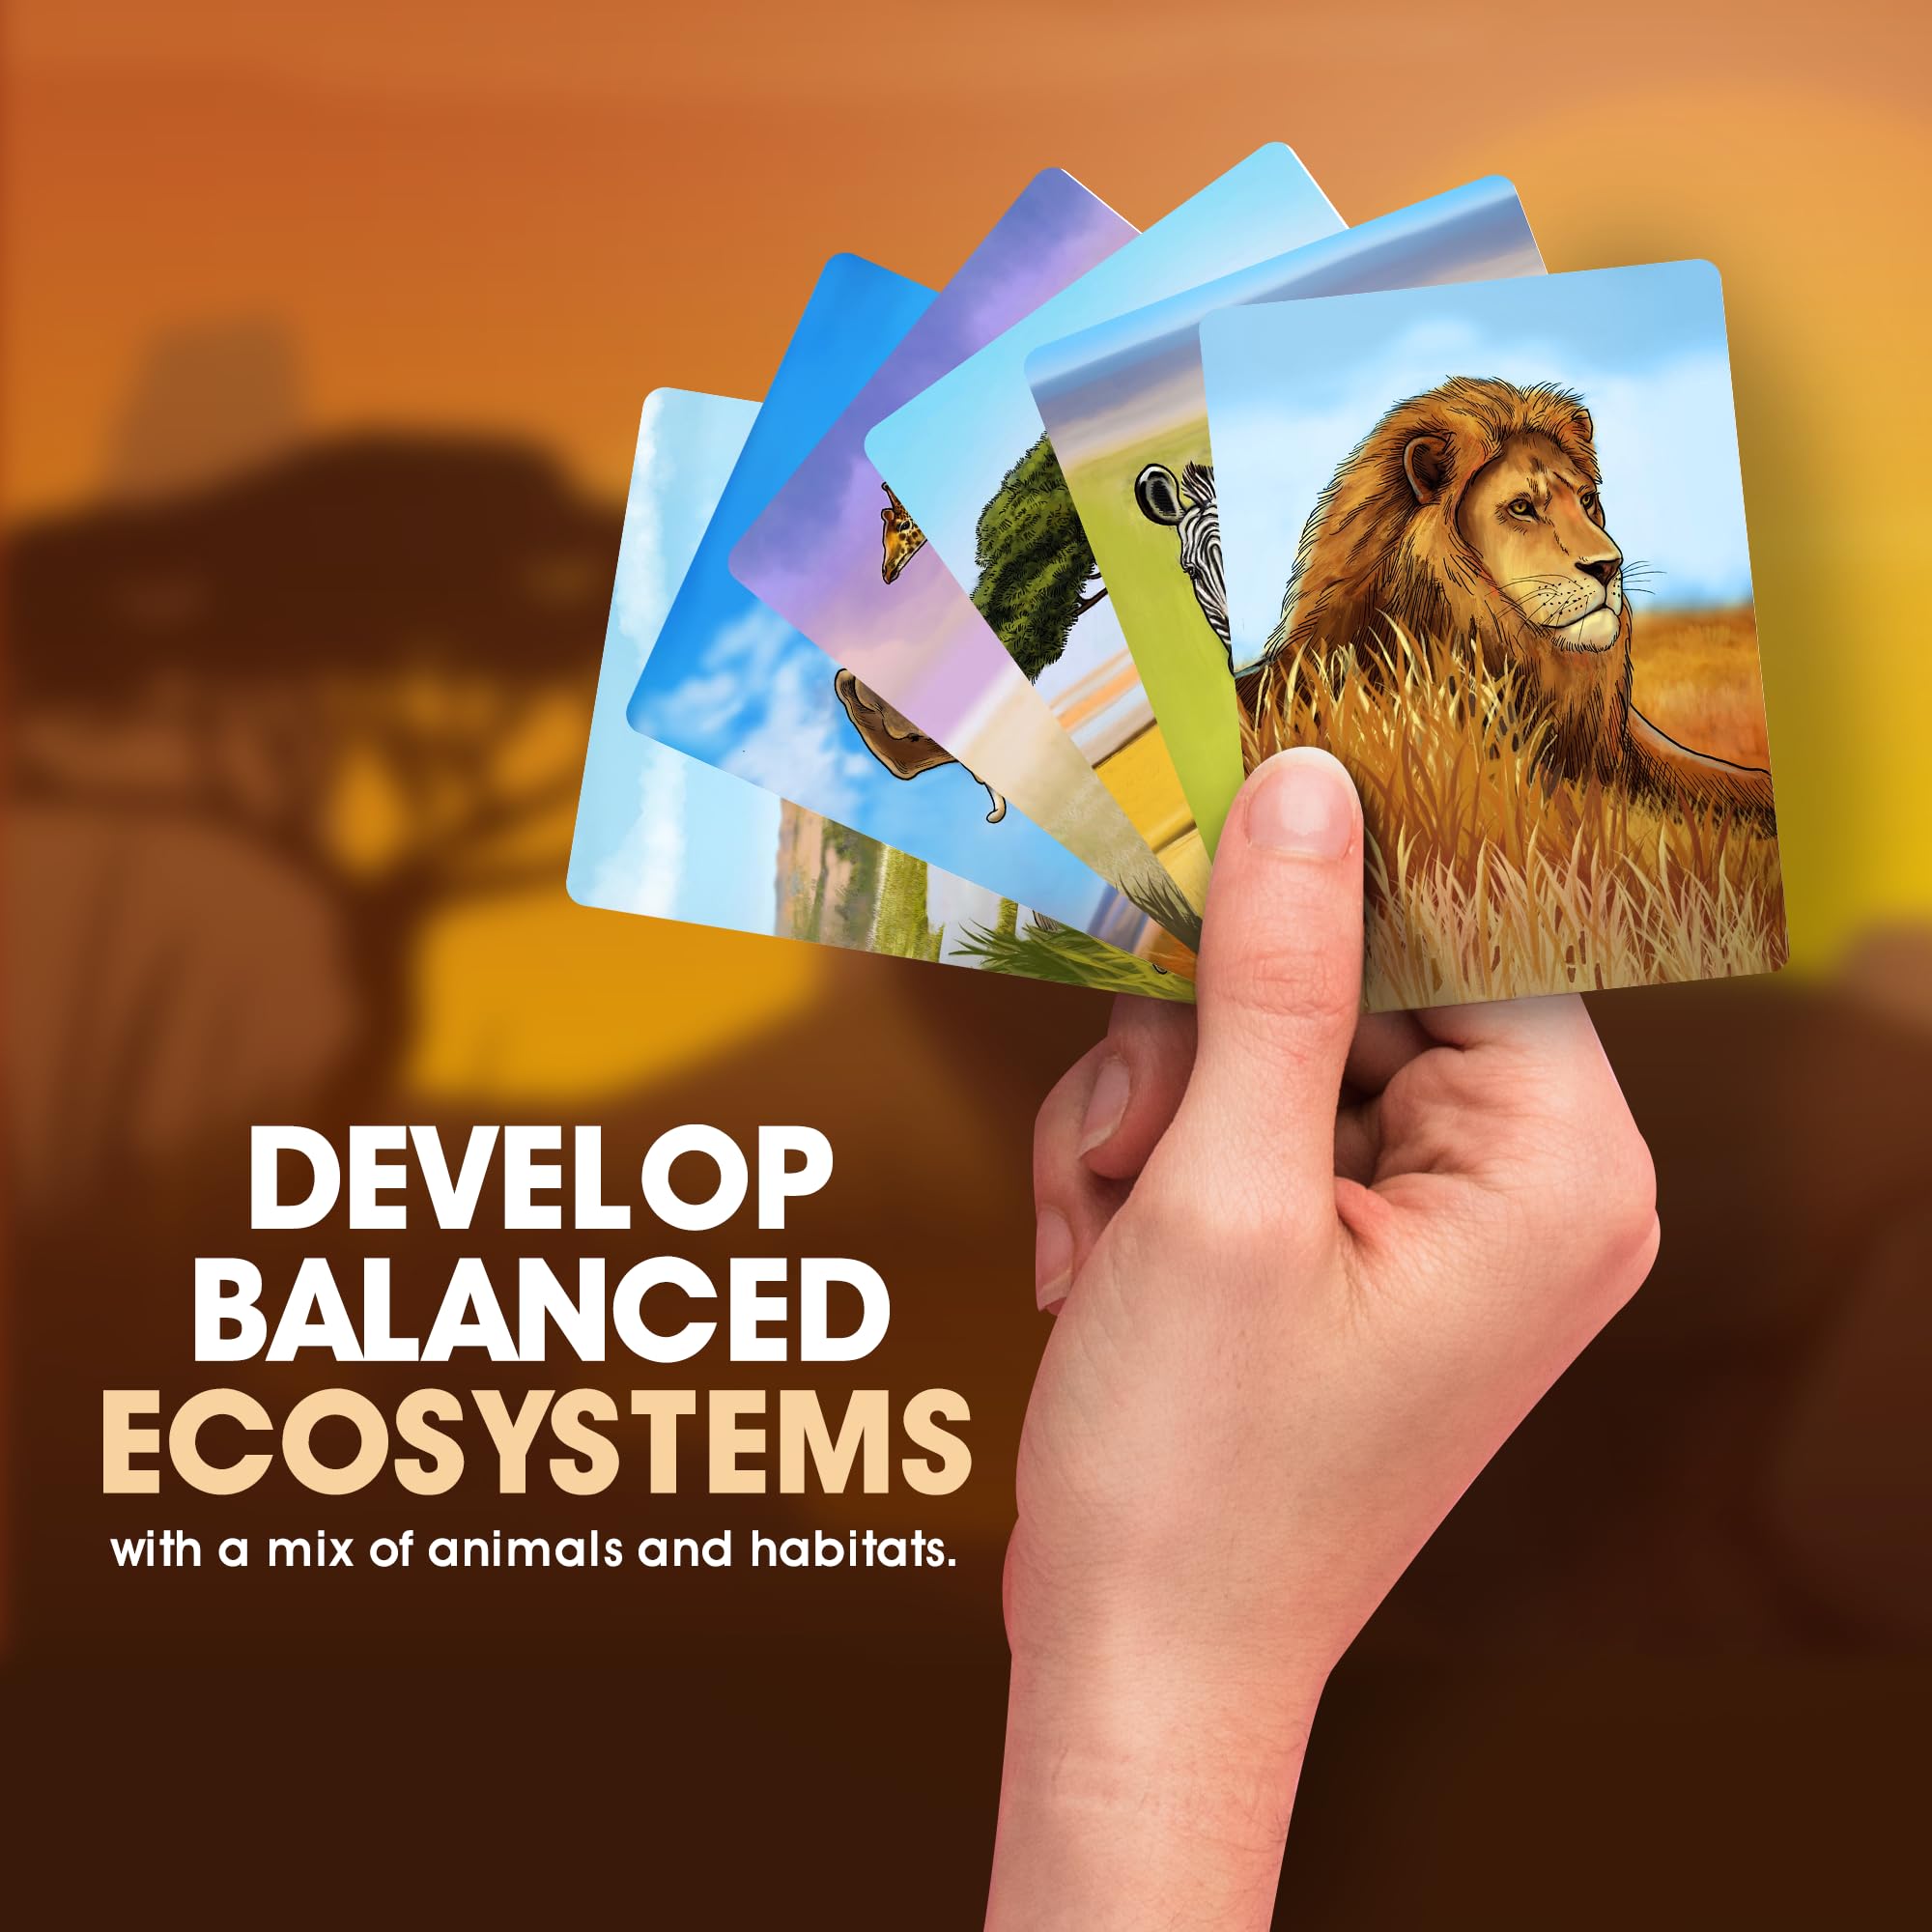 Ecosystem: Savanna - A Family Card Game About Animals on Grassy Woodland of African Savanna - Fun & Educational Ecology Game for Kids & Adults - Strategy Board Game for Gamers, Students & Teachers